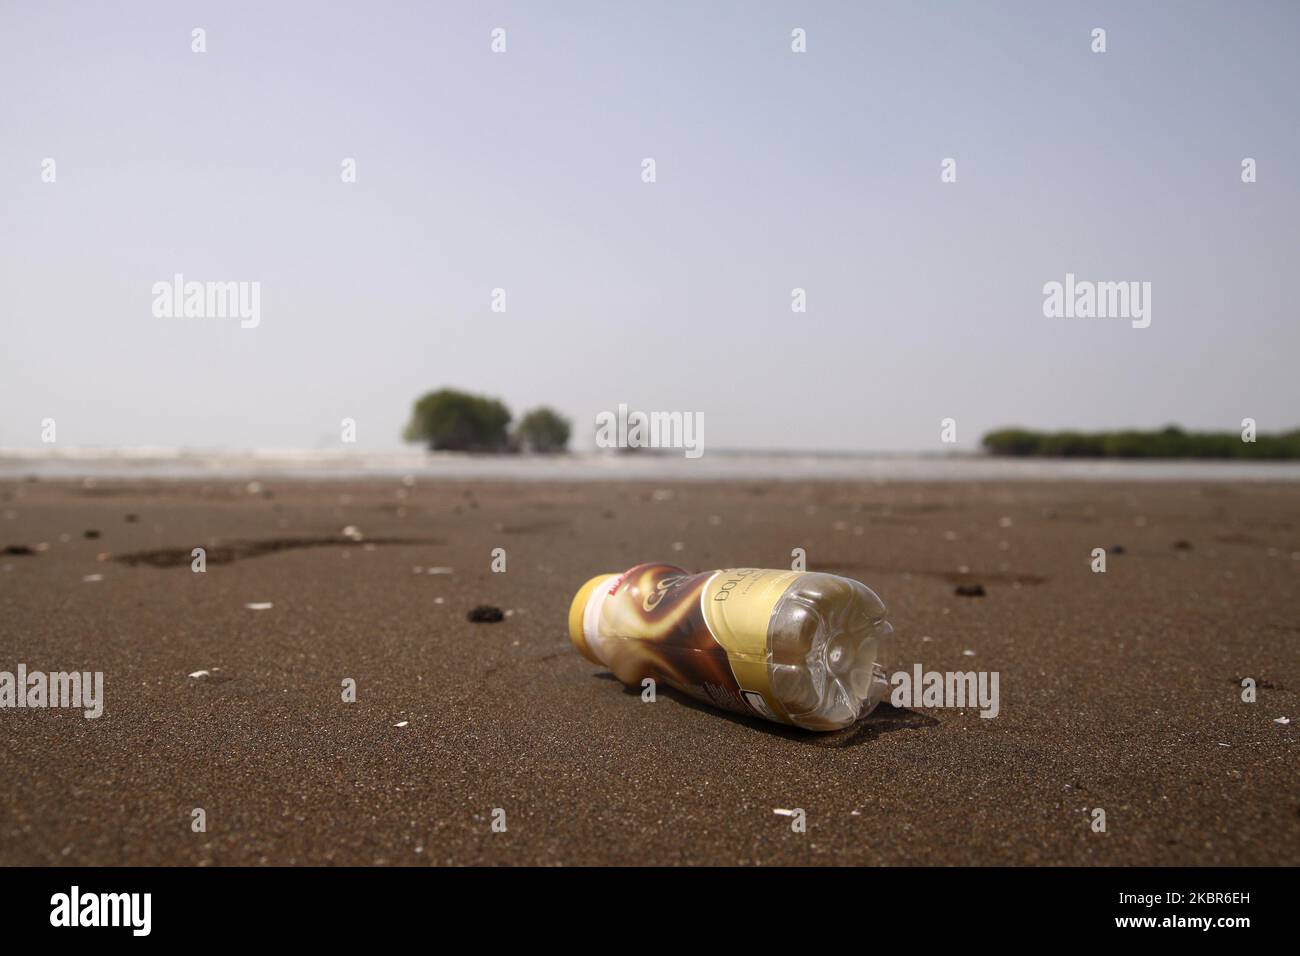 Plastic bottle waste are seen at the Pantai Bahagia, Muara Gembong sub-district, Bekasi regency, West Java province, on June 13, 2020. According to the research reports from the Indonesian Institute of Sciences (LIPI), released in 2018, the amount of plastic waste in the Indonesian sea reaches 100.000 - 400.000 tons per year, with an average coastline spread of arround 1.71 pieces per square meter with an average weight of 46.55 grams per square meter. While the highest average plastic waste was found on the coast of Sulawesi, reaching 2.11 pieces per square meter, followed by the Java coast w Stock Photo